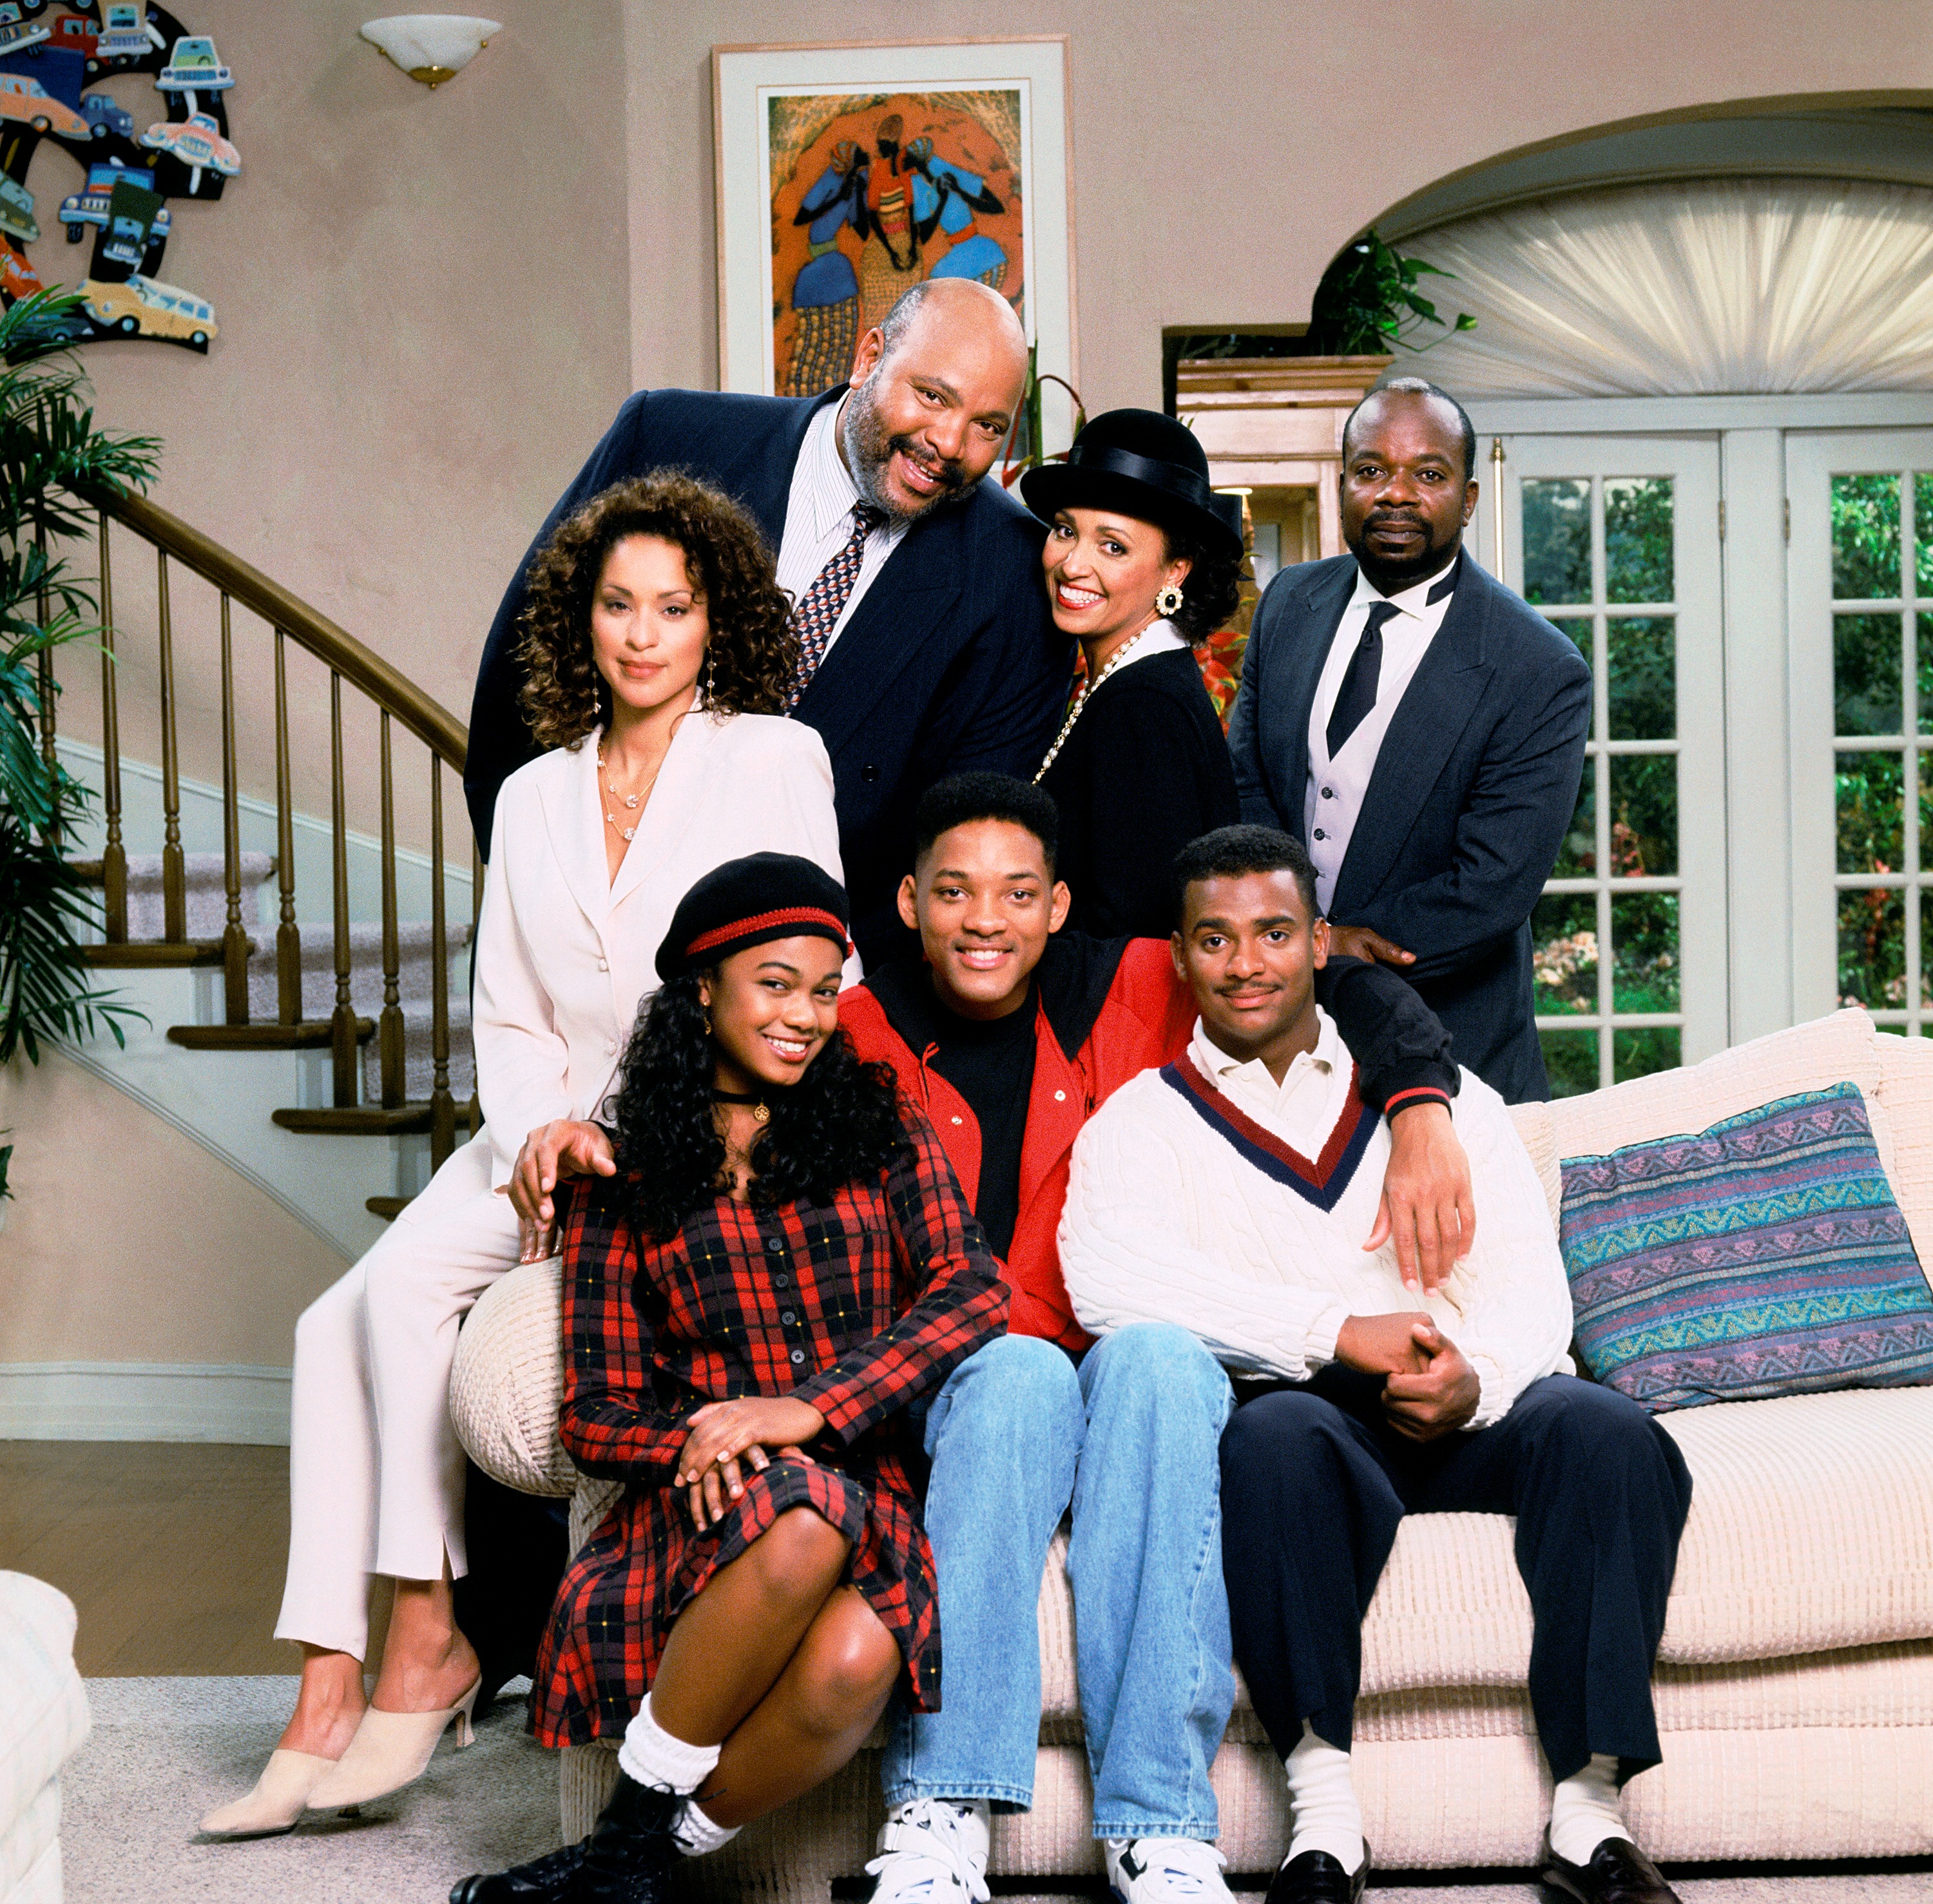 The fresh prince of bel air episodes